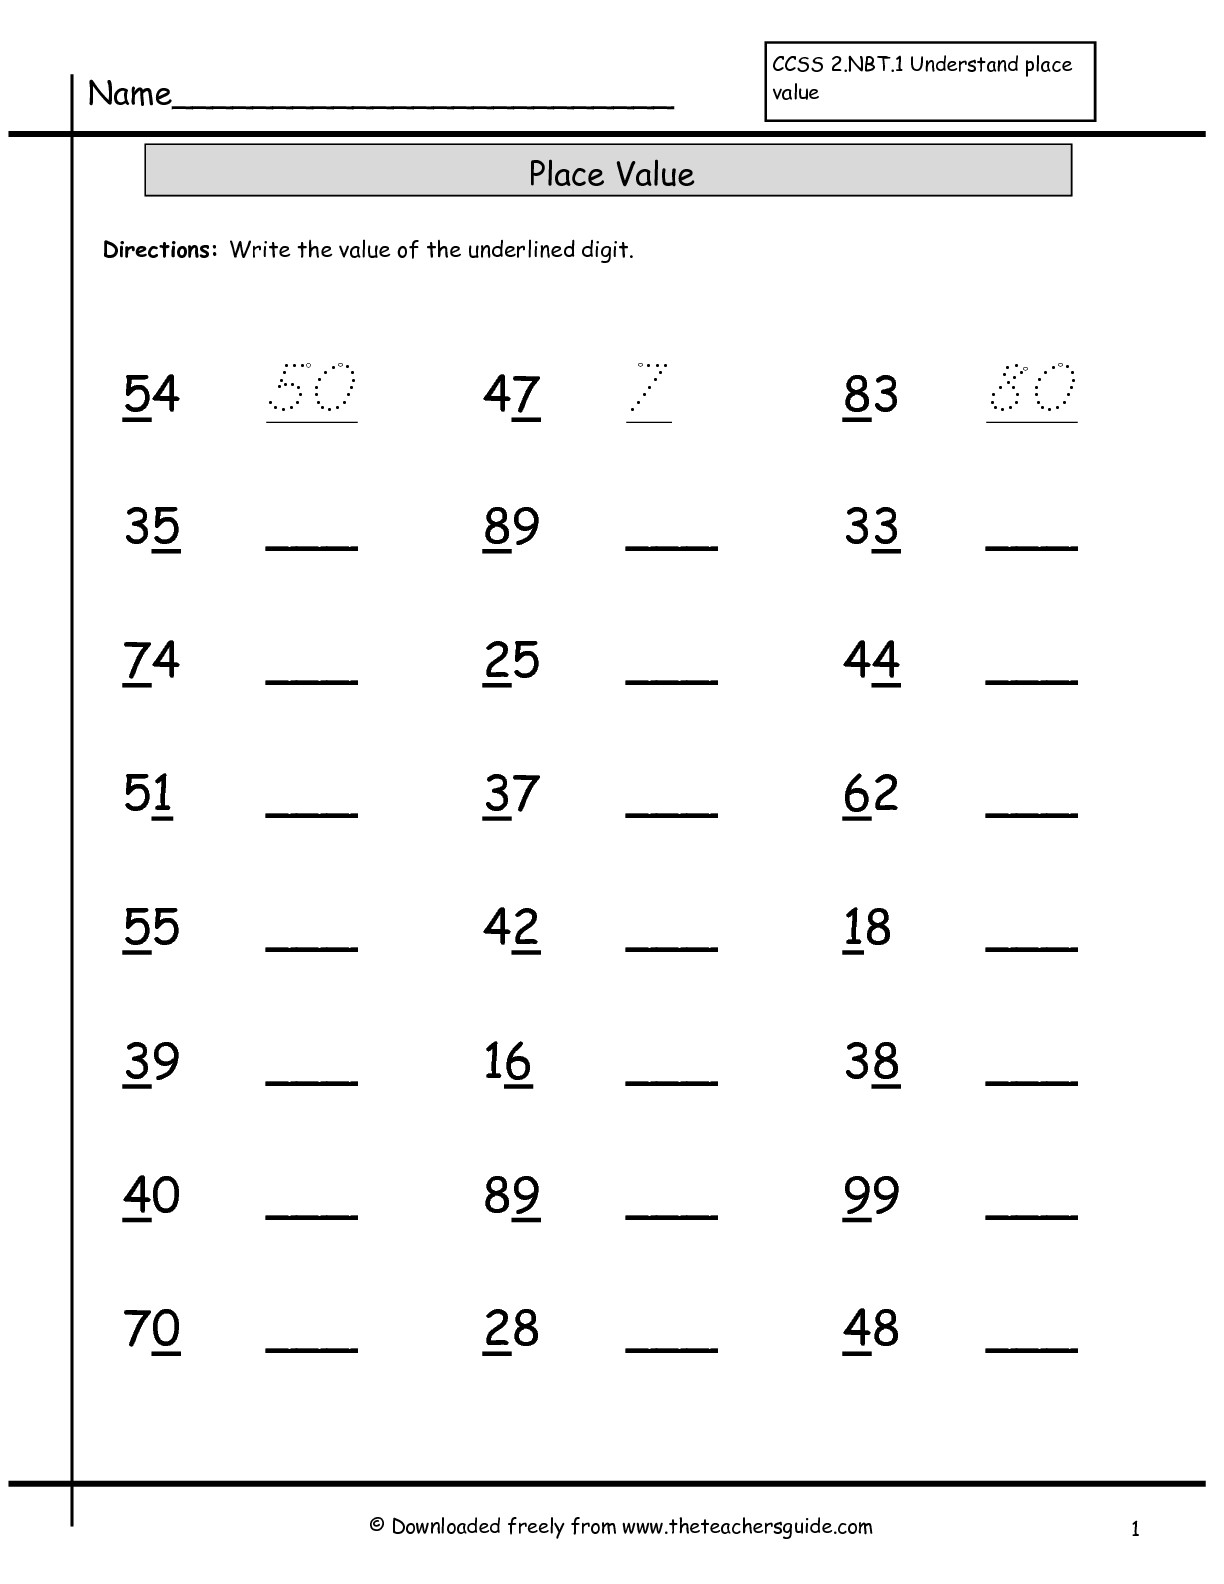 17 Best Images of Teaching Guide Words Worksheets Place Value